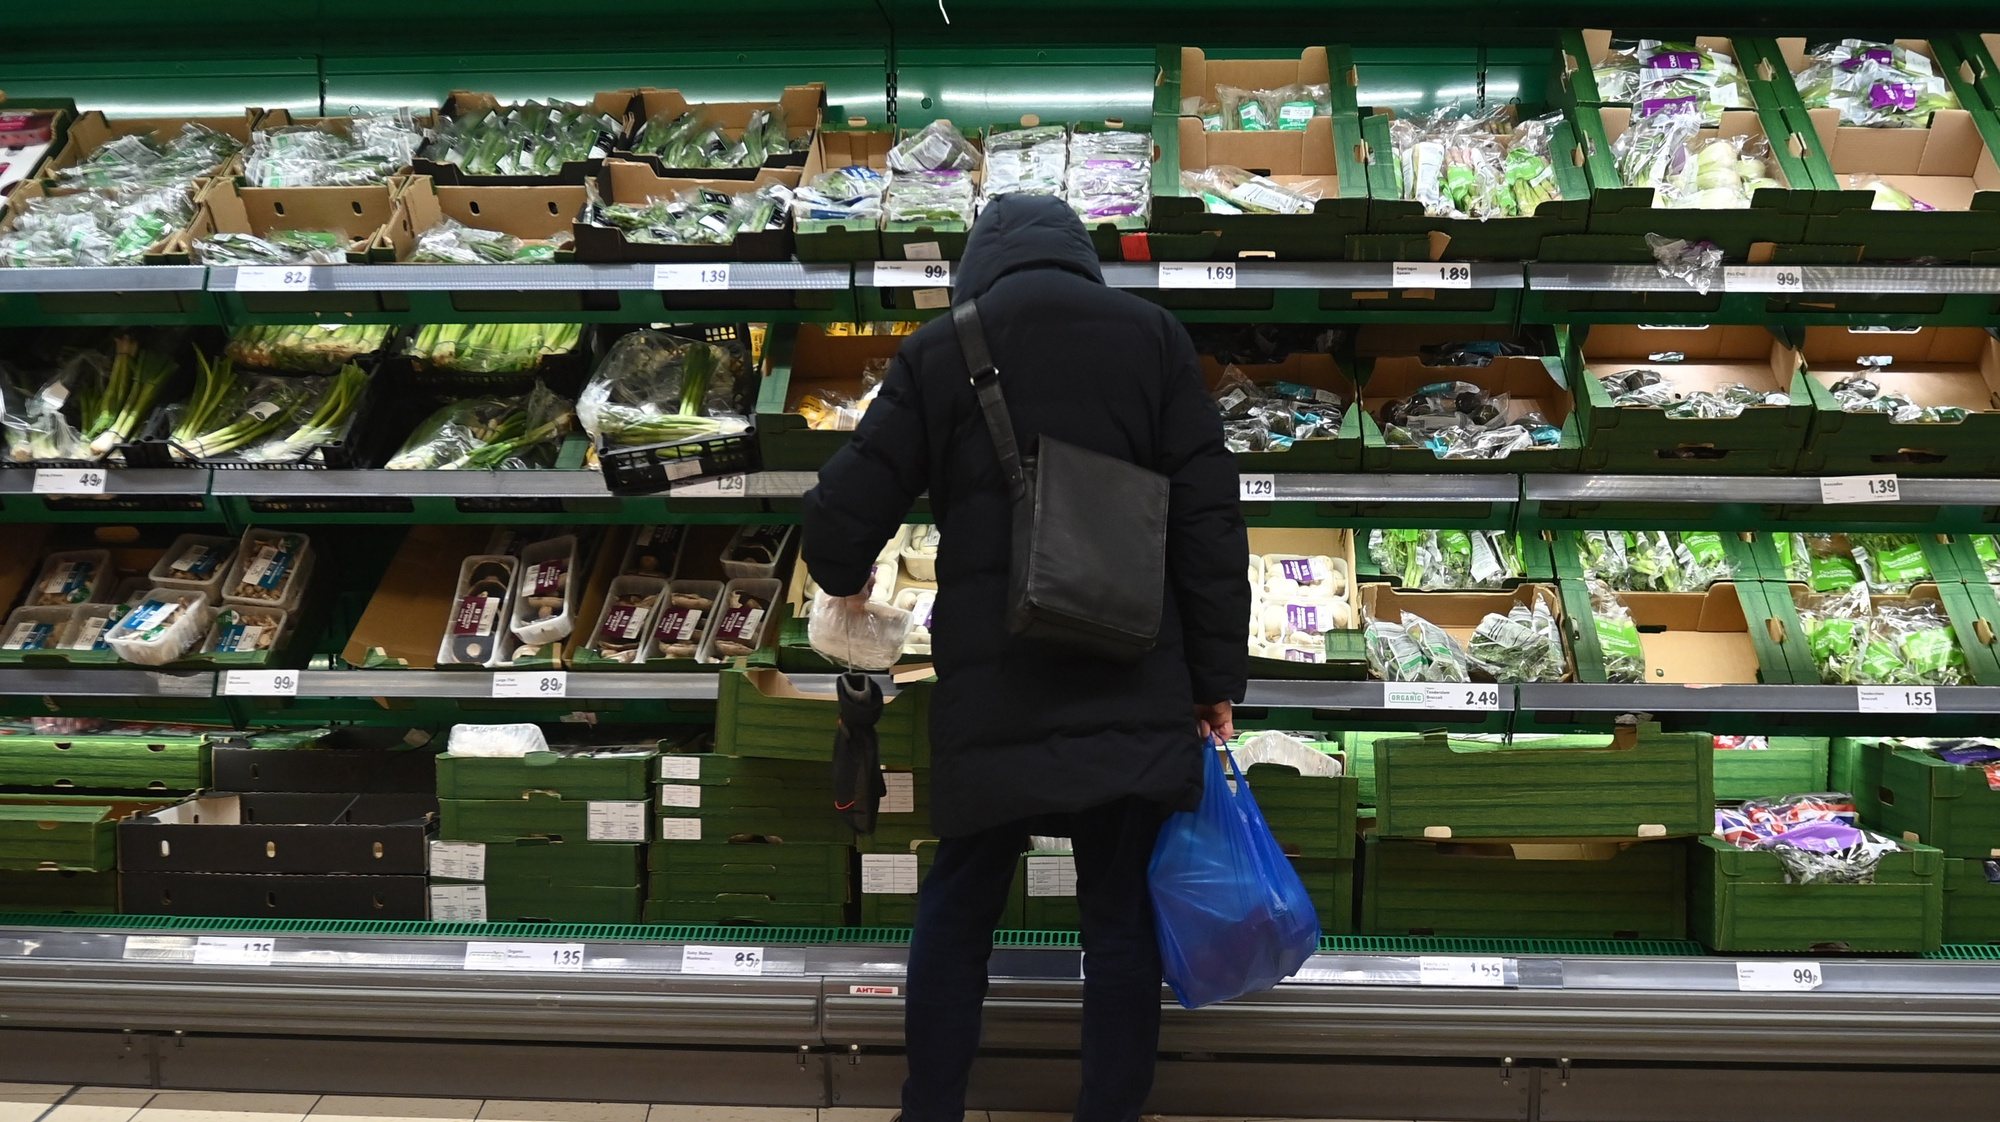 epa10413280 A shopper at a supermarket in London, Britain, 18 January 2022. The Office for National Statistics stated that Inflation, which measures the rate of price rises, fell to 10.5 percent in the year to December, compared to 10.7 percent in November. However, food prices in particular milk, cheese and eggs along with jam, sugar and chocolate are continuing to rise.  EPA/NEIL HALL